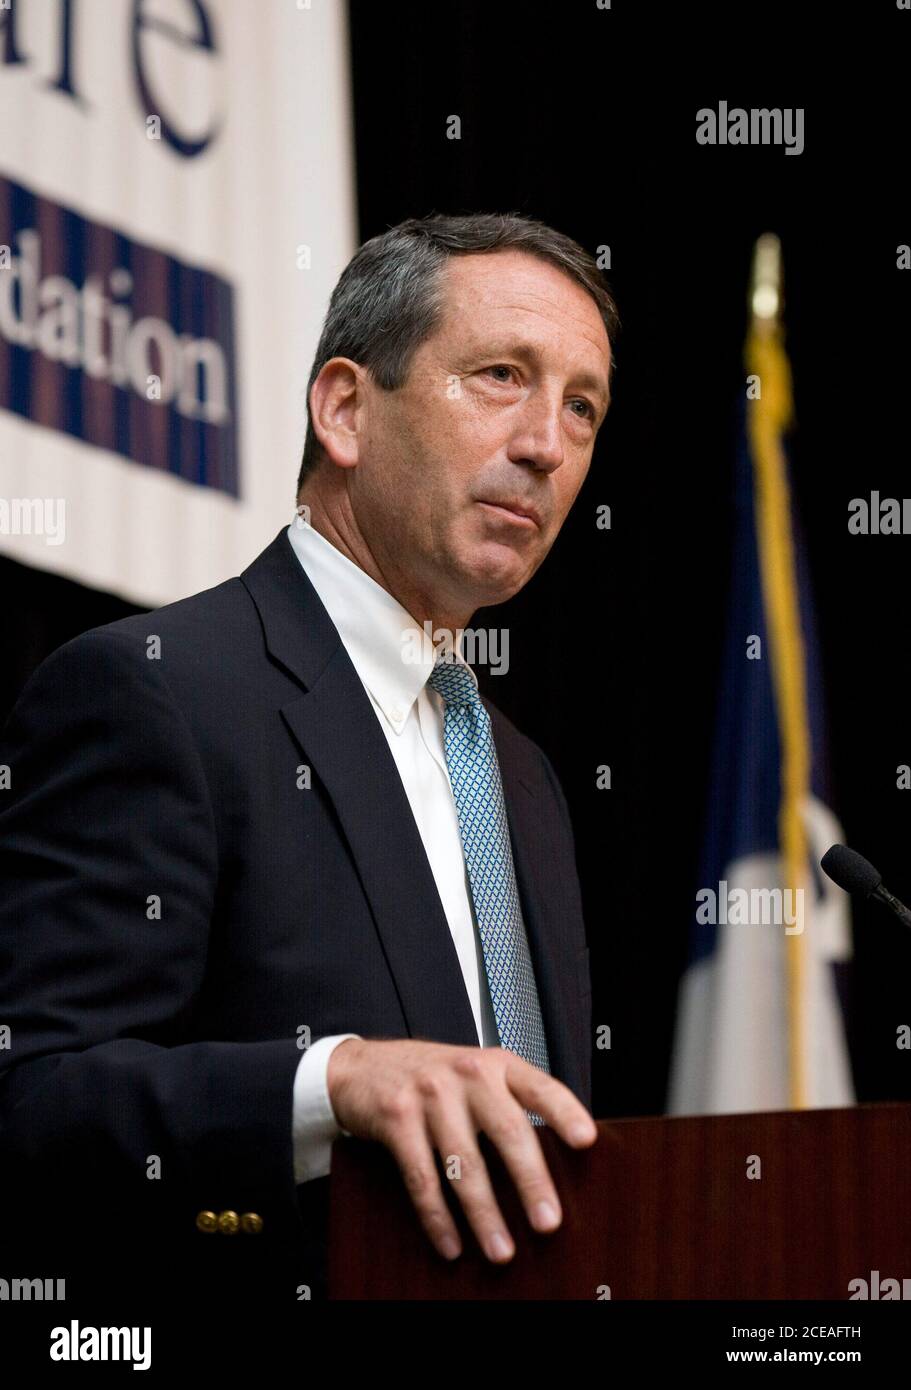 Austin, TX January 10, 2008: Conservative South Carolina Governor Mark Sanford, speaking at the Texas Public Policy Foundation dinner, has been mentioned as a possible Vice-Presidential pick for 2008.  ©Bob Daemmrich Stock Photo